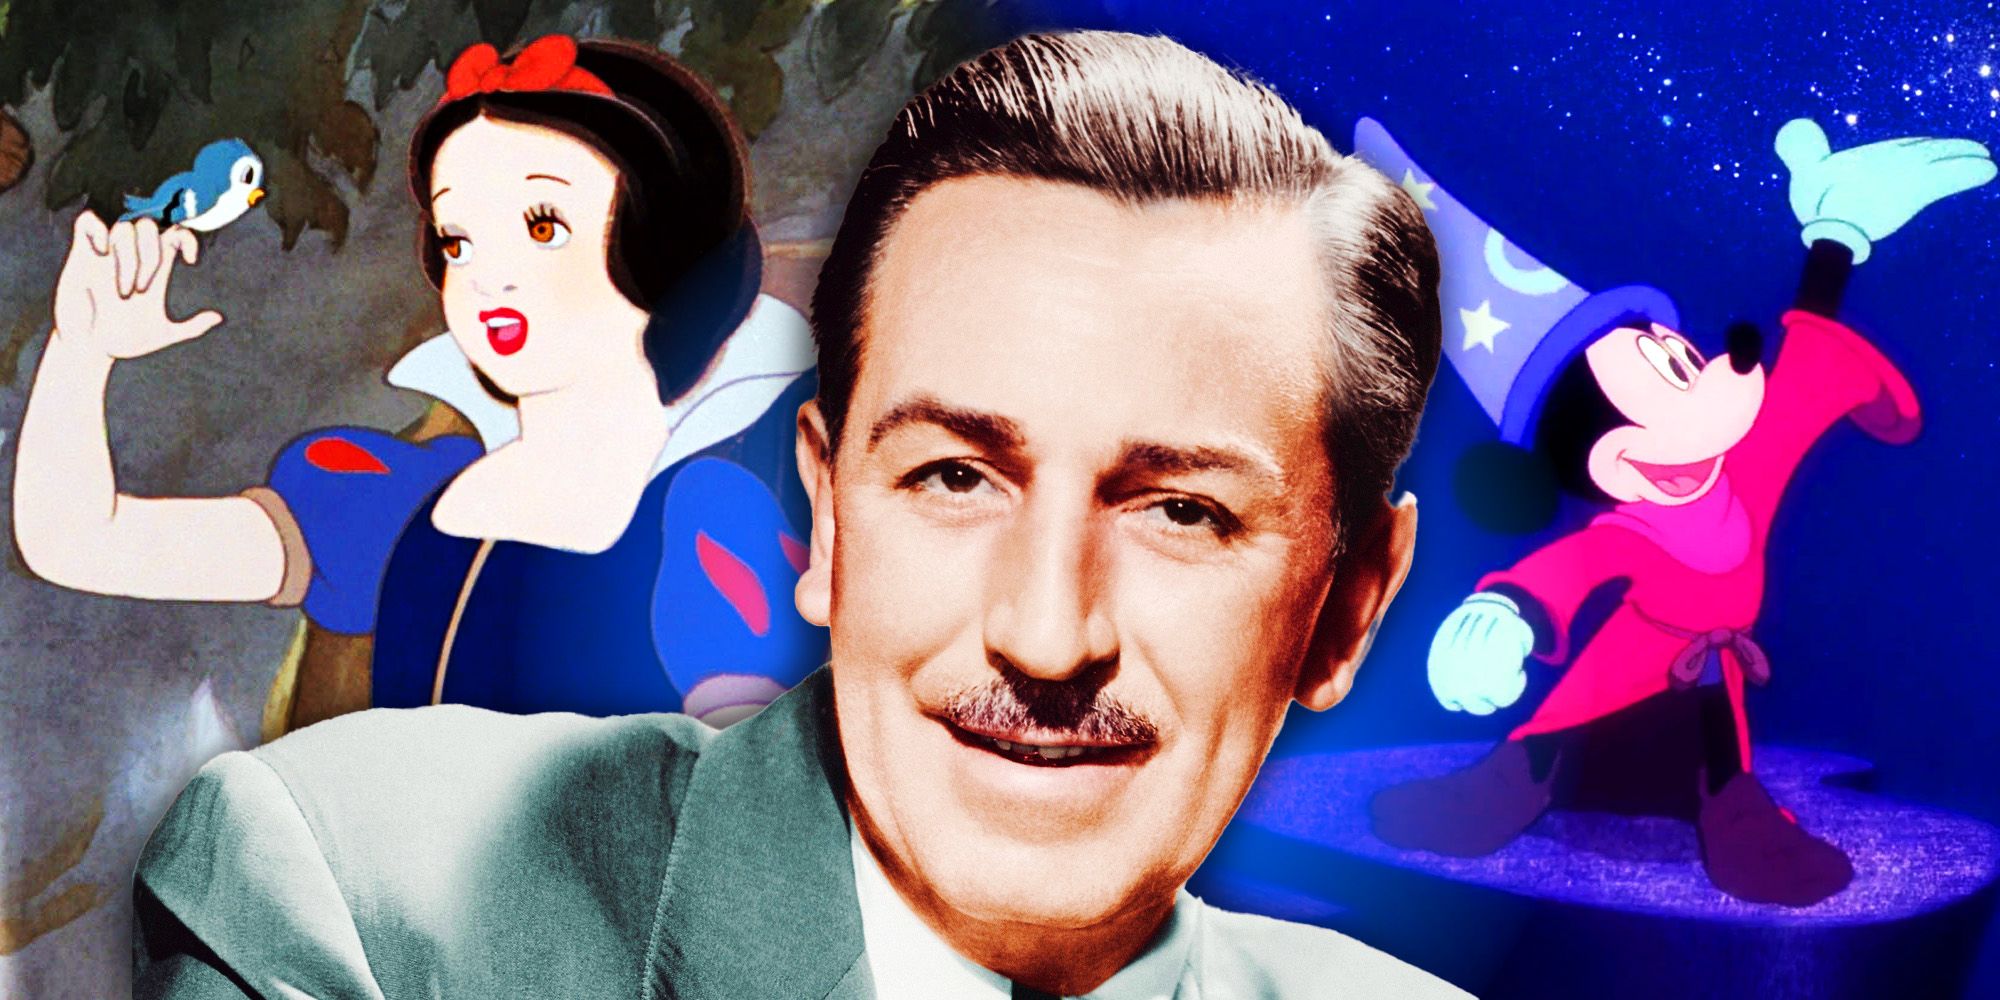 Snow White with a bird next to Walt Disney and Mickey Mouse as the apprentice in Fantasia